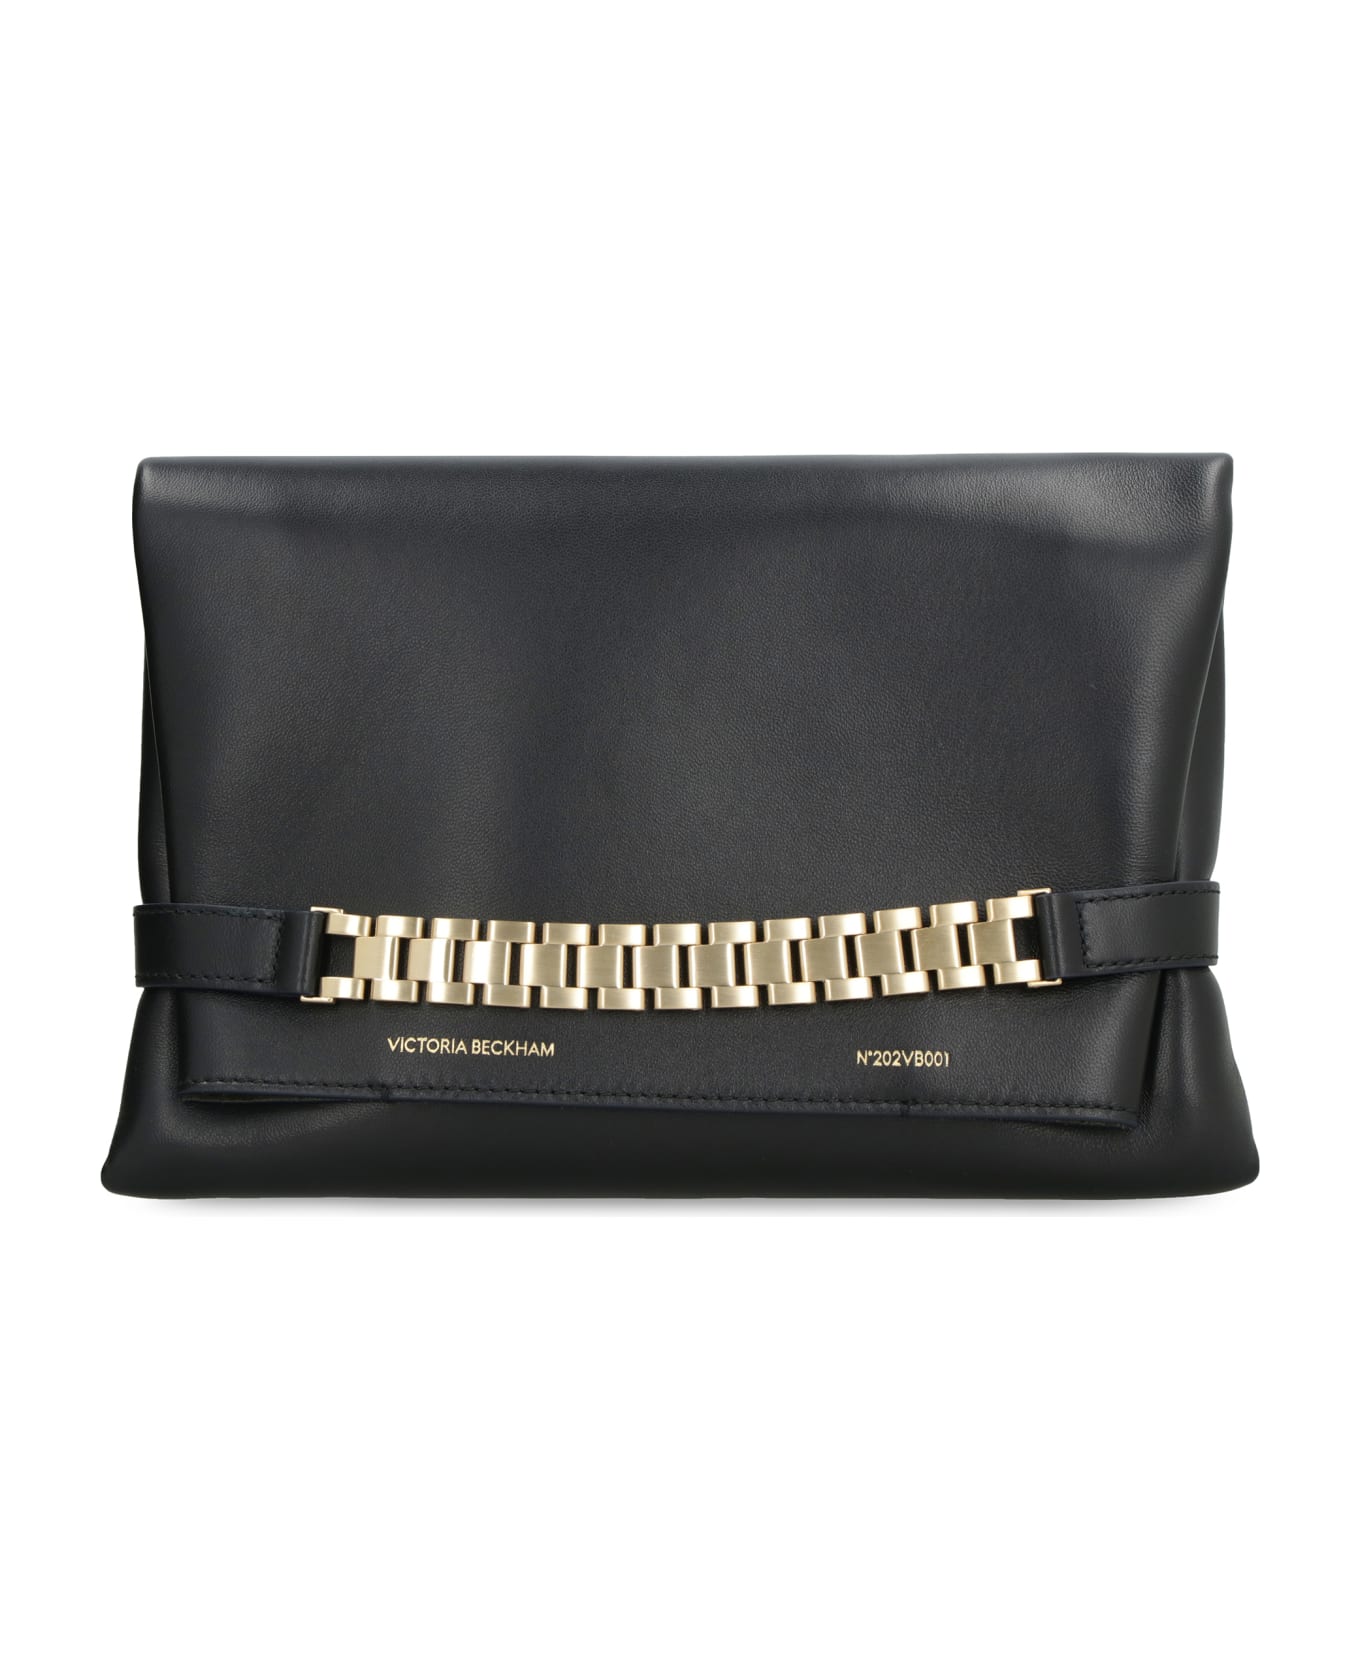 Victoria Beckham Leather Pouch - black クラッチバッグ